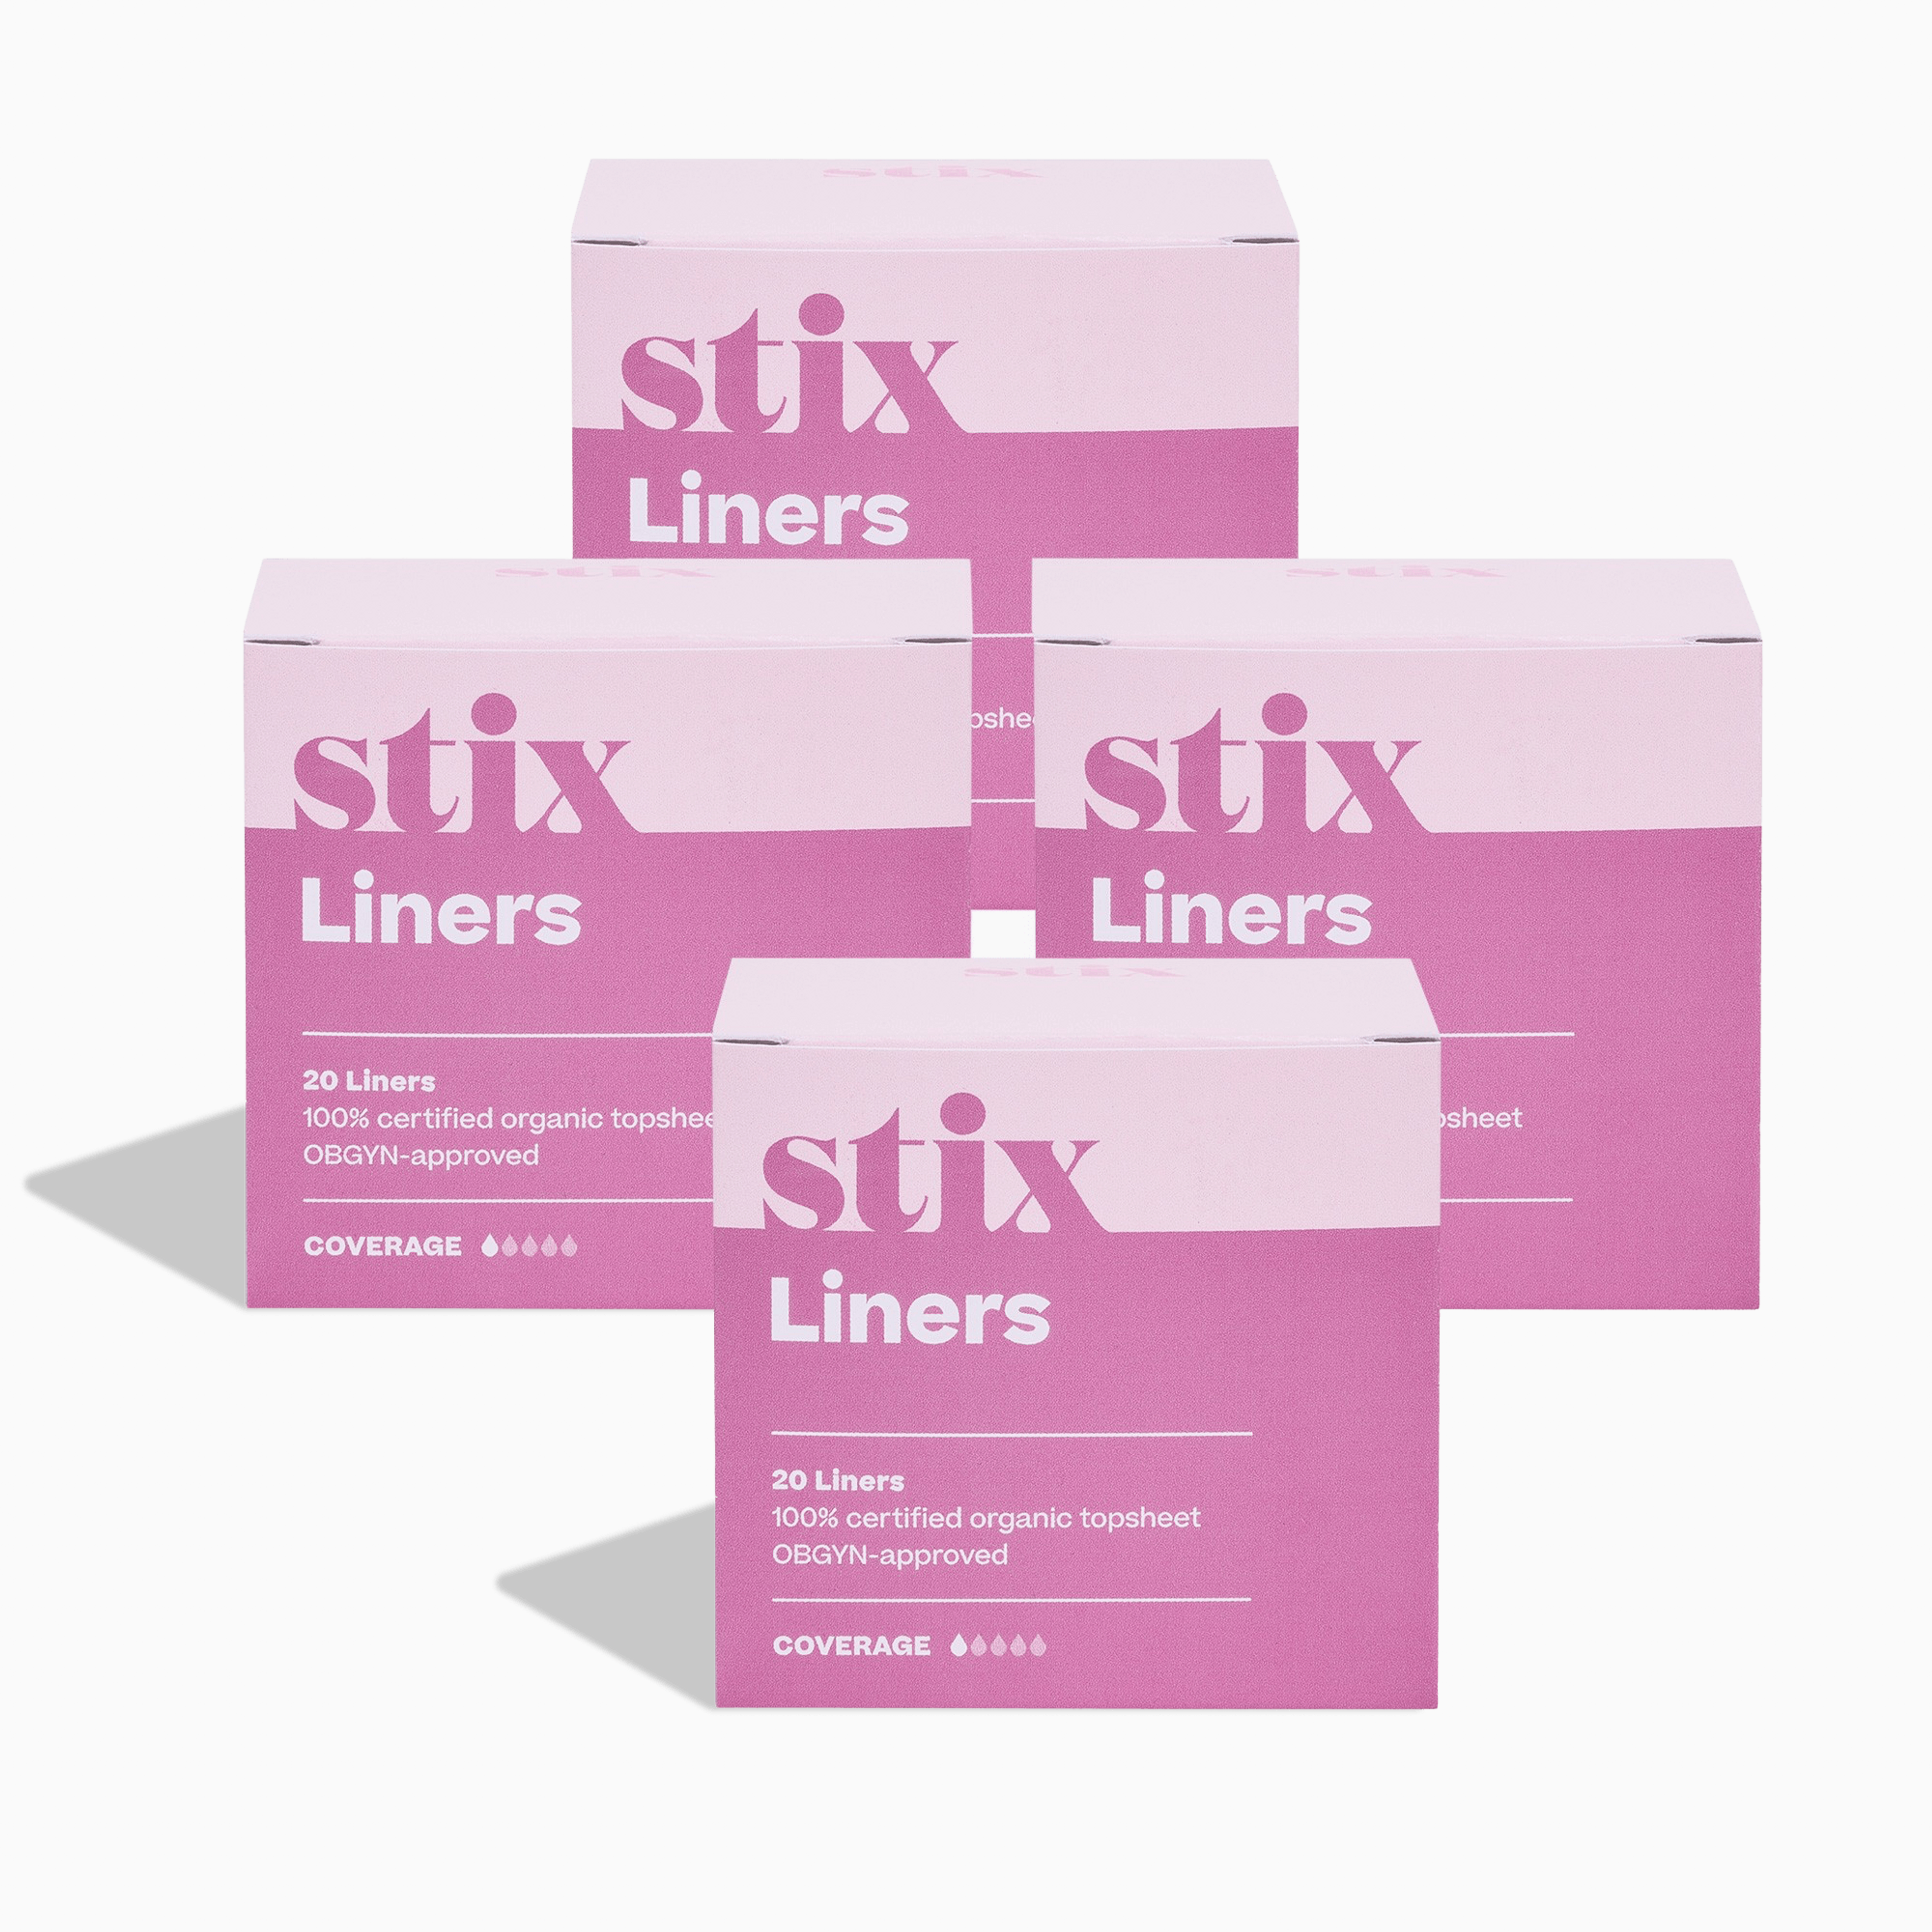 Liners Value Pack